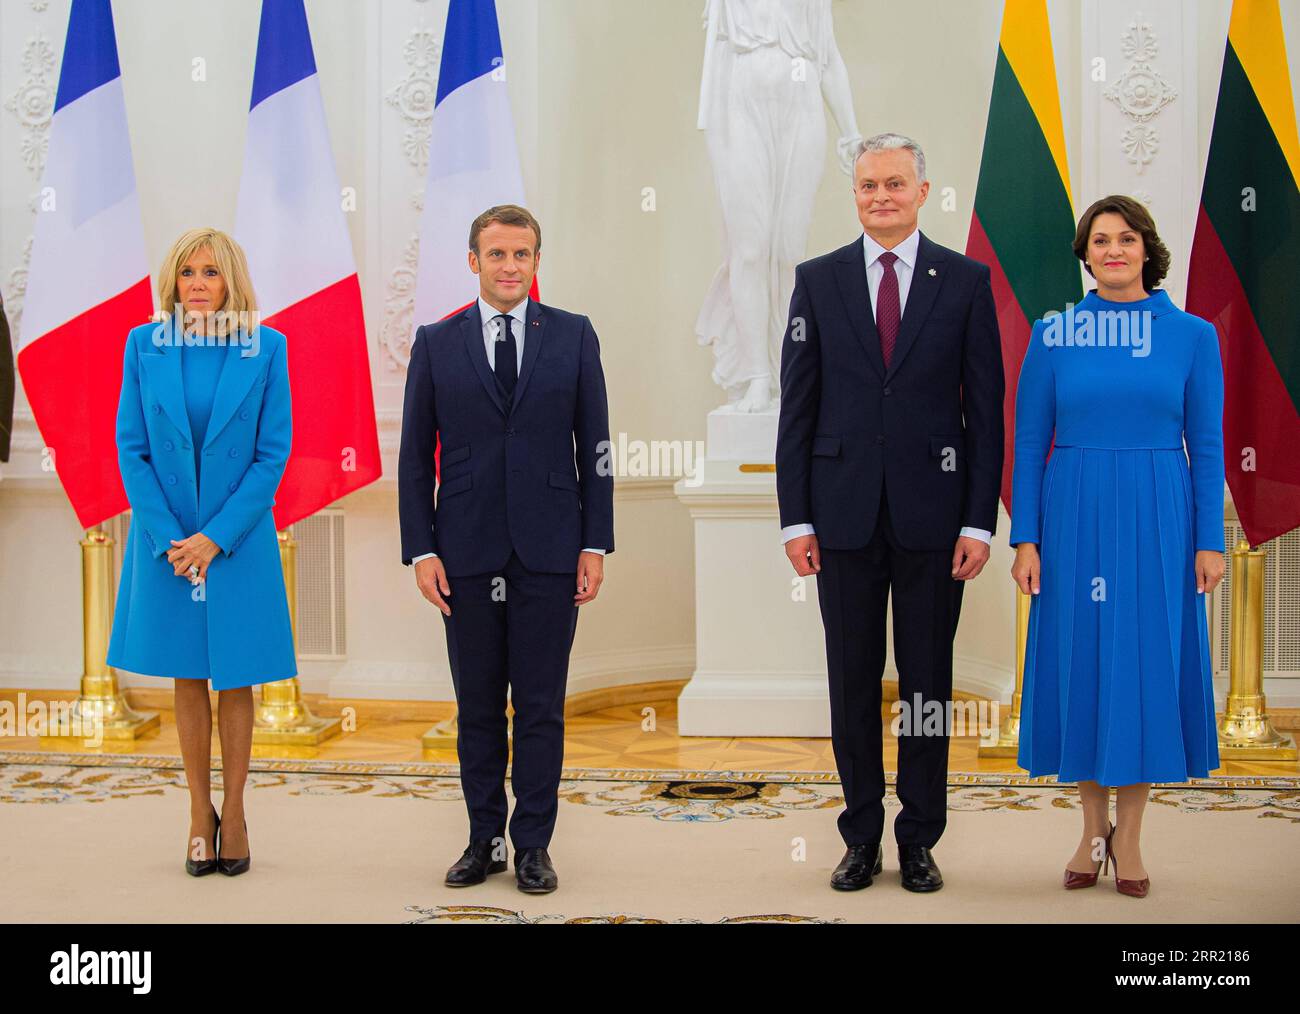 200928 -- VILNIUS, Sept. 28, 2020 -- Lithuanian President Gitanas Nauseda 2nd R and his wife Diana Nausediene 1st R welcome visiting French President Emmanuel Macron 2nd L and his wife Brigitte Macron in Vilnius, Lithuania, on Sept. 28, 2020. Lithuania has made huge progress in the two decades since the last official visit by Jacques Chirac in 2001, visiting French President Emmanuel Macron said here on Monday, referring to one of his predecessors. Photo by /Xinhua LITHUANIA-VILNIUS-FRANCE-PRESIDENT-VISIT AlfredasxPliadis PUBLICATIONxNOTxINxCHN Stock Photo